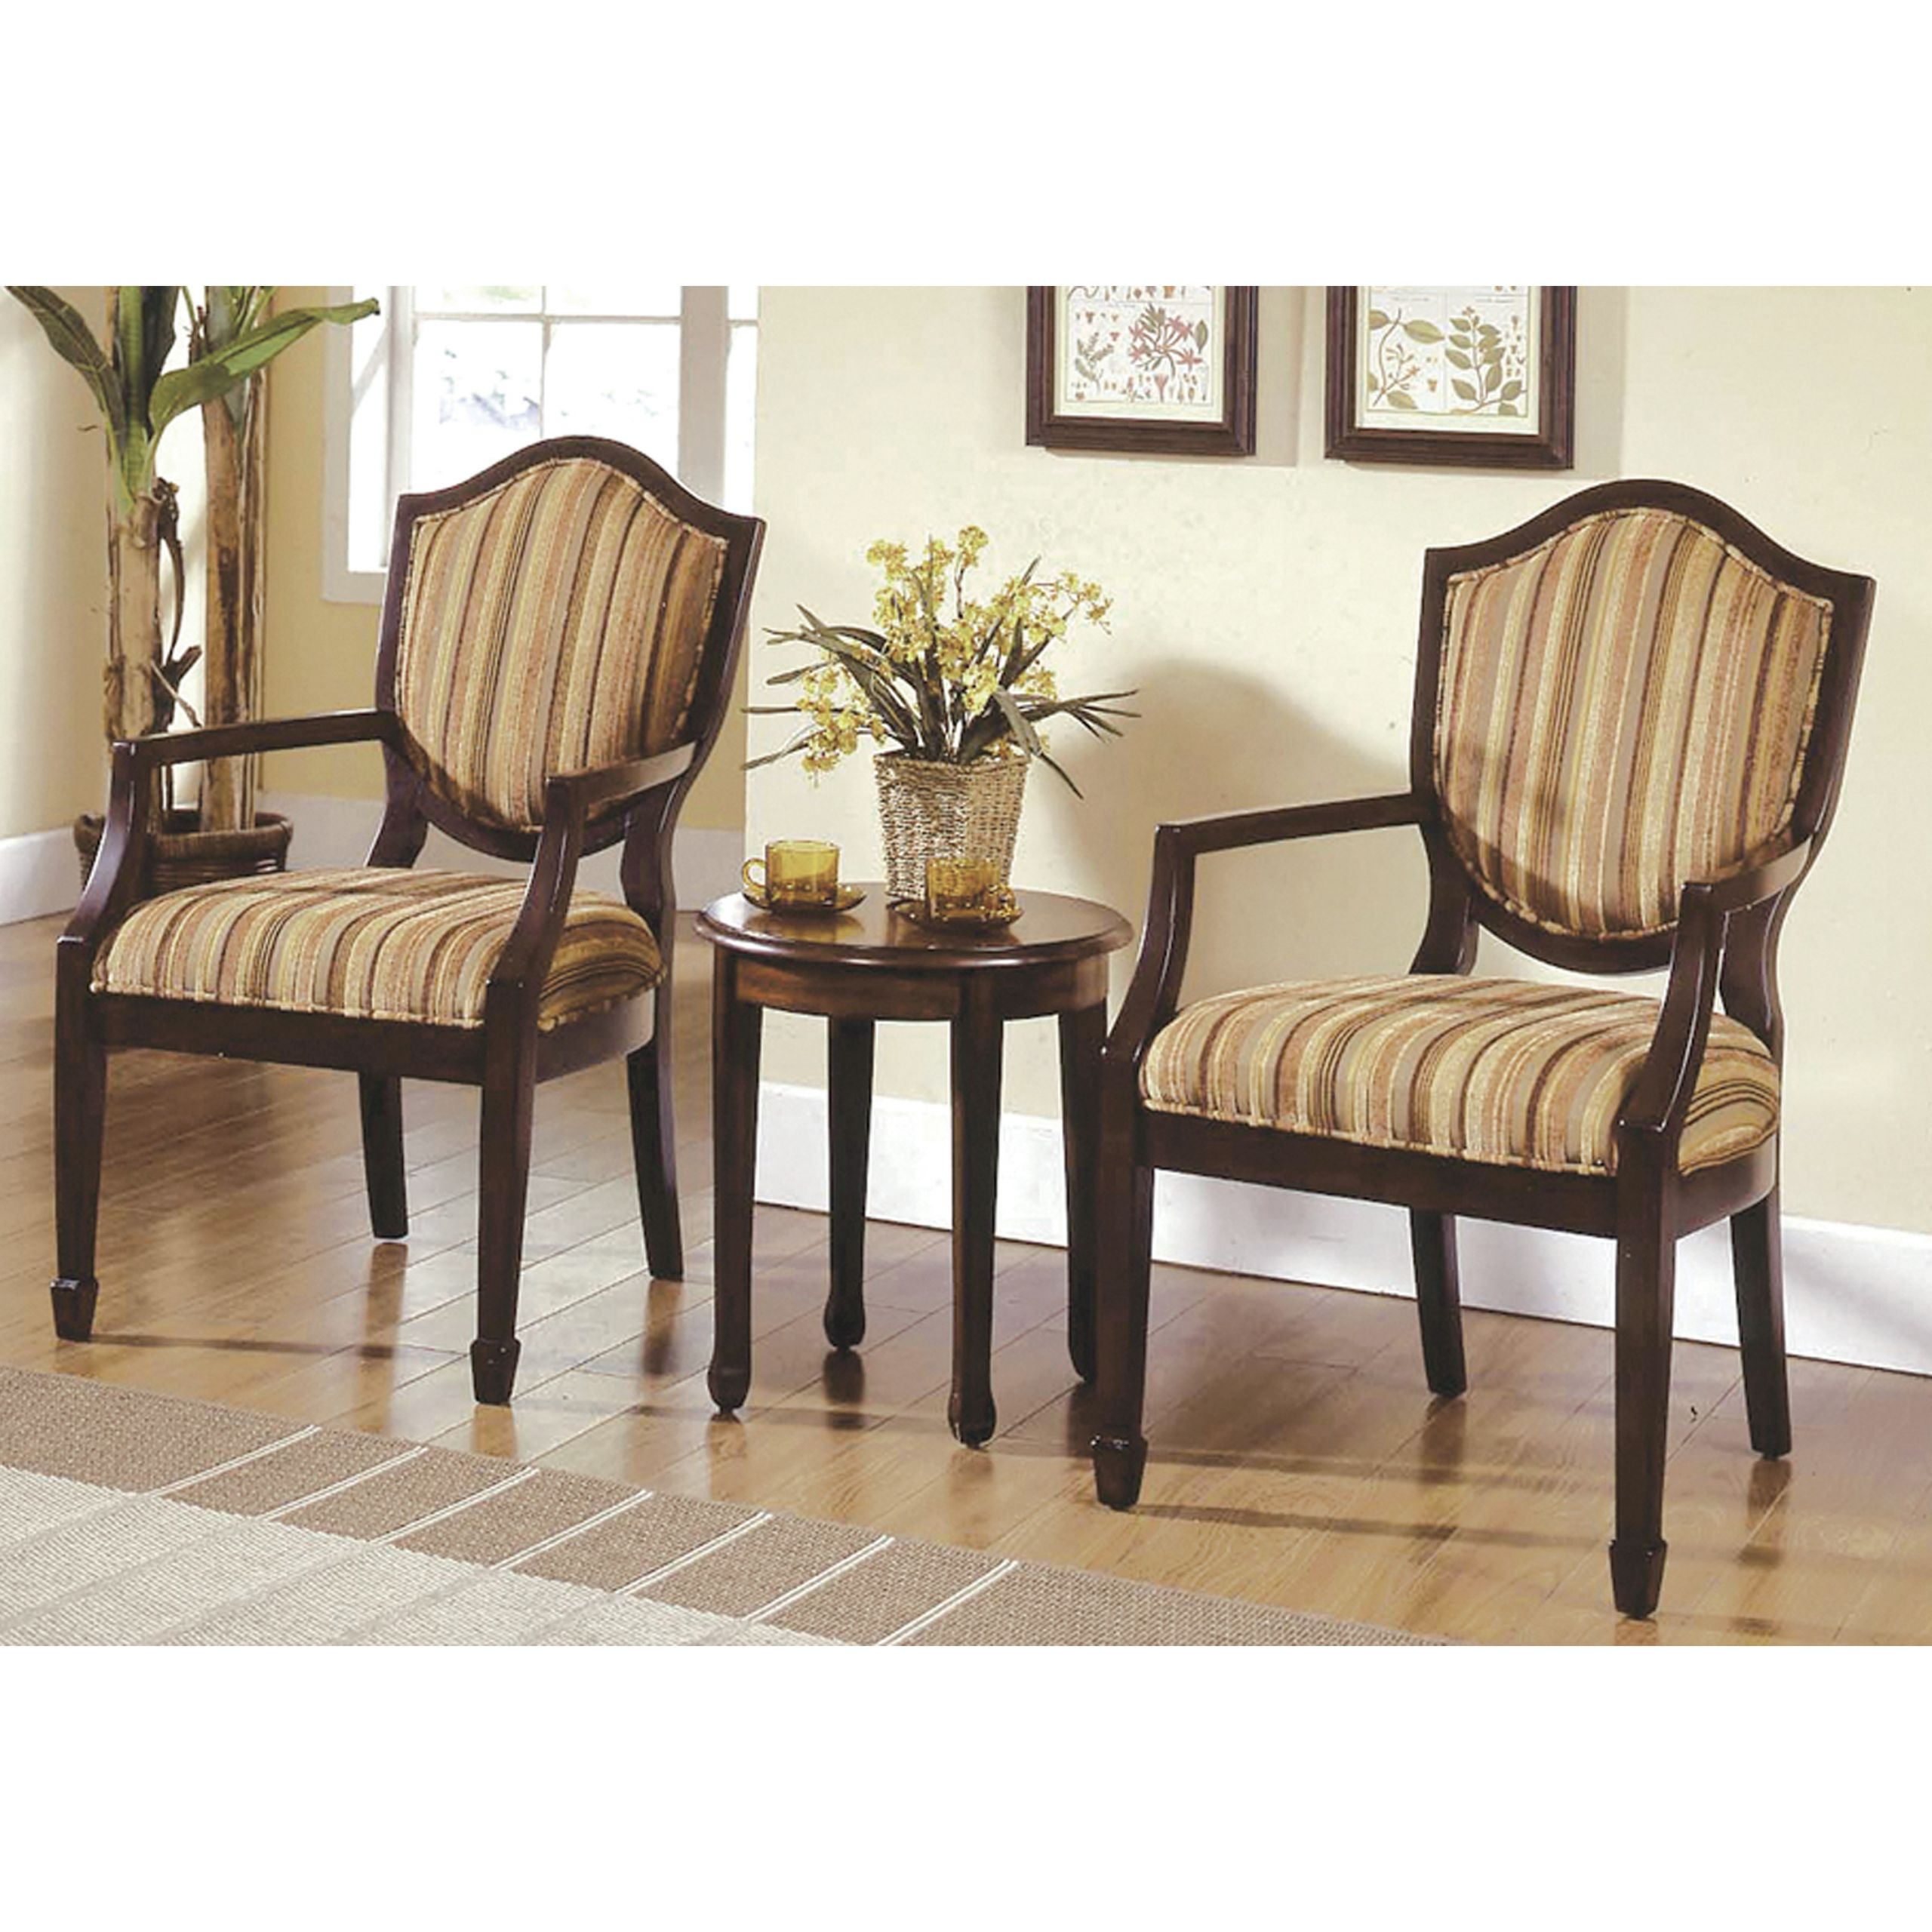 Occasional Chairs For Living Room
 Best Master Furniture s Brandi 3 Piece Traditional Living